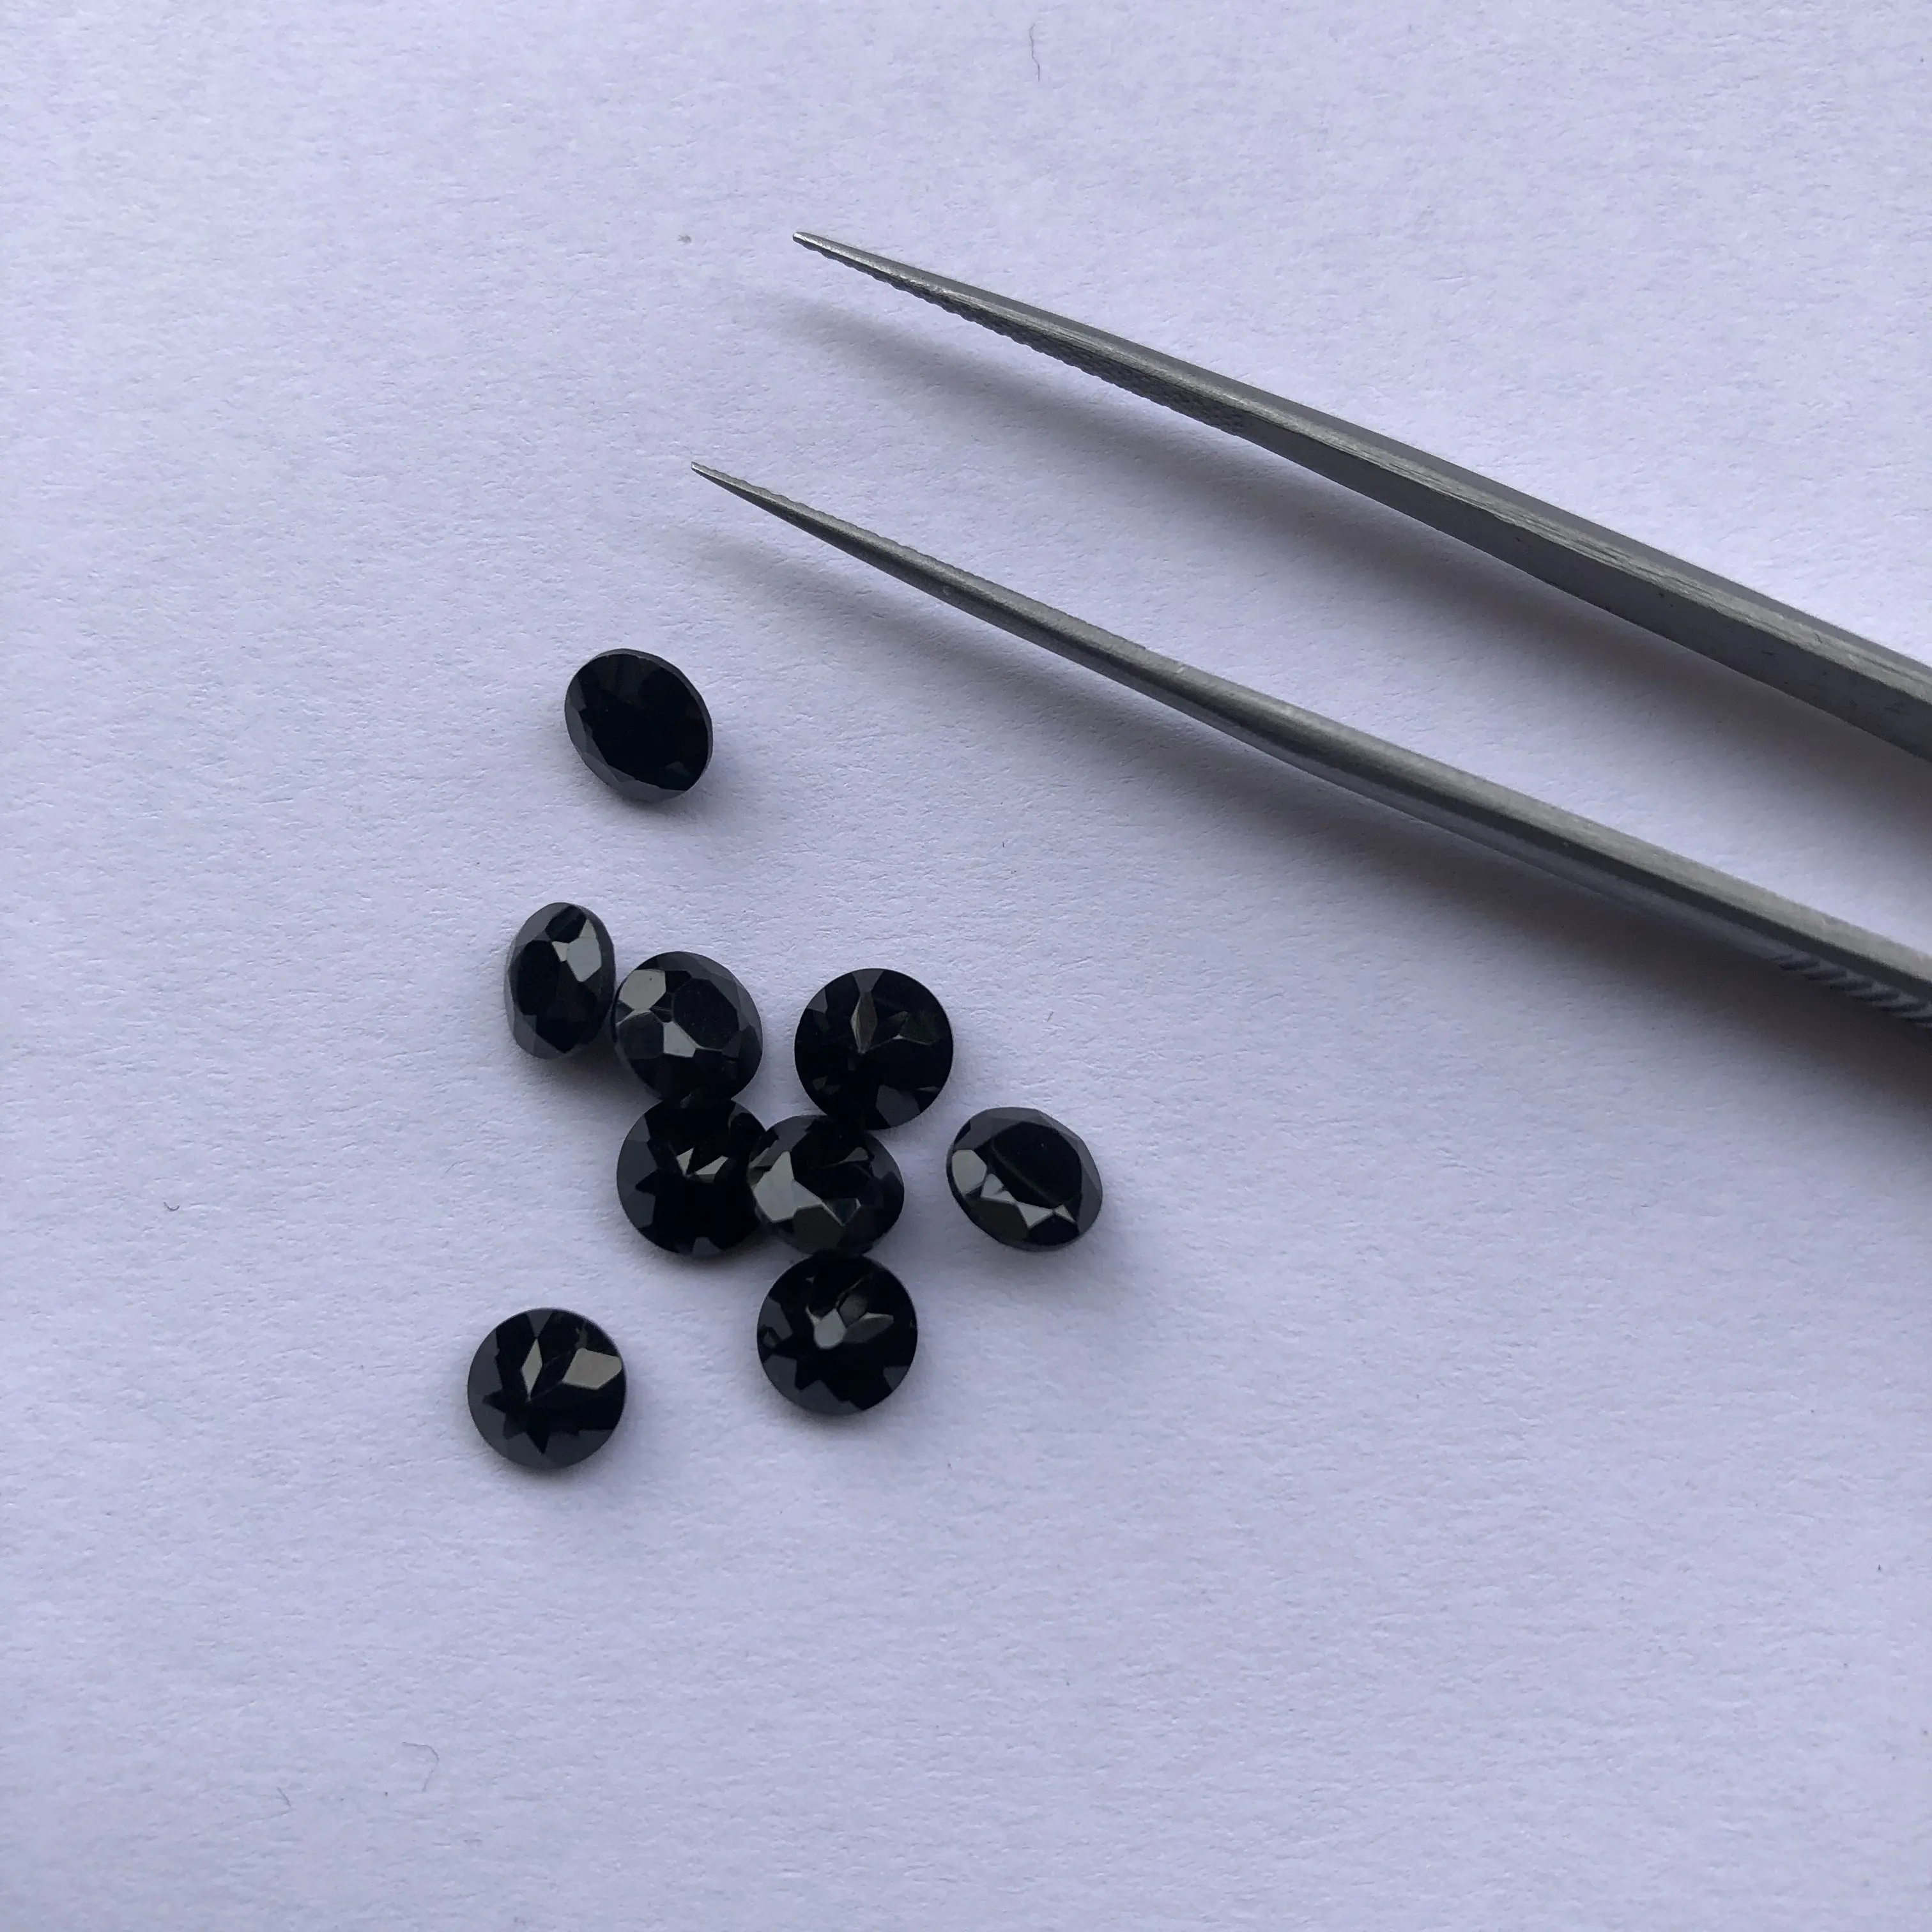 5mm Natural Black Spinel Stone Faceted Round Loose Gemstones Manufacturer at Wholesale Factory Price Buy Online Now DIY Closeout